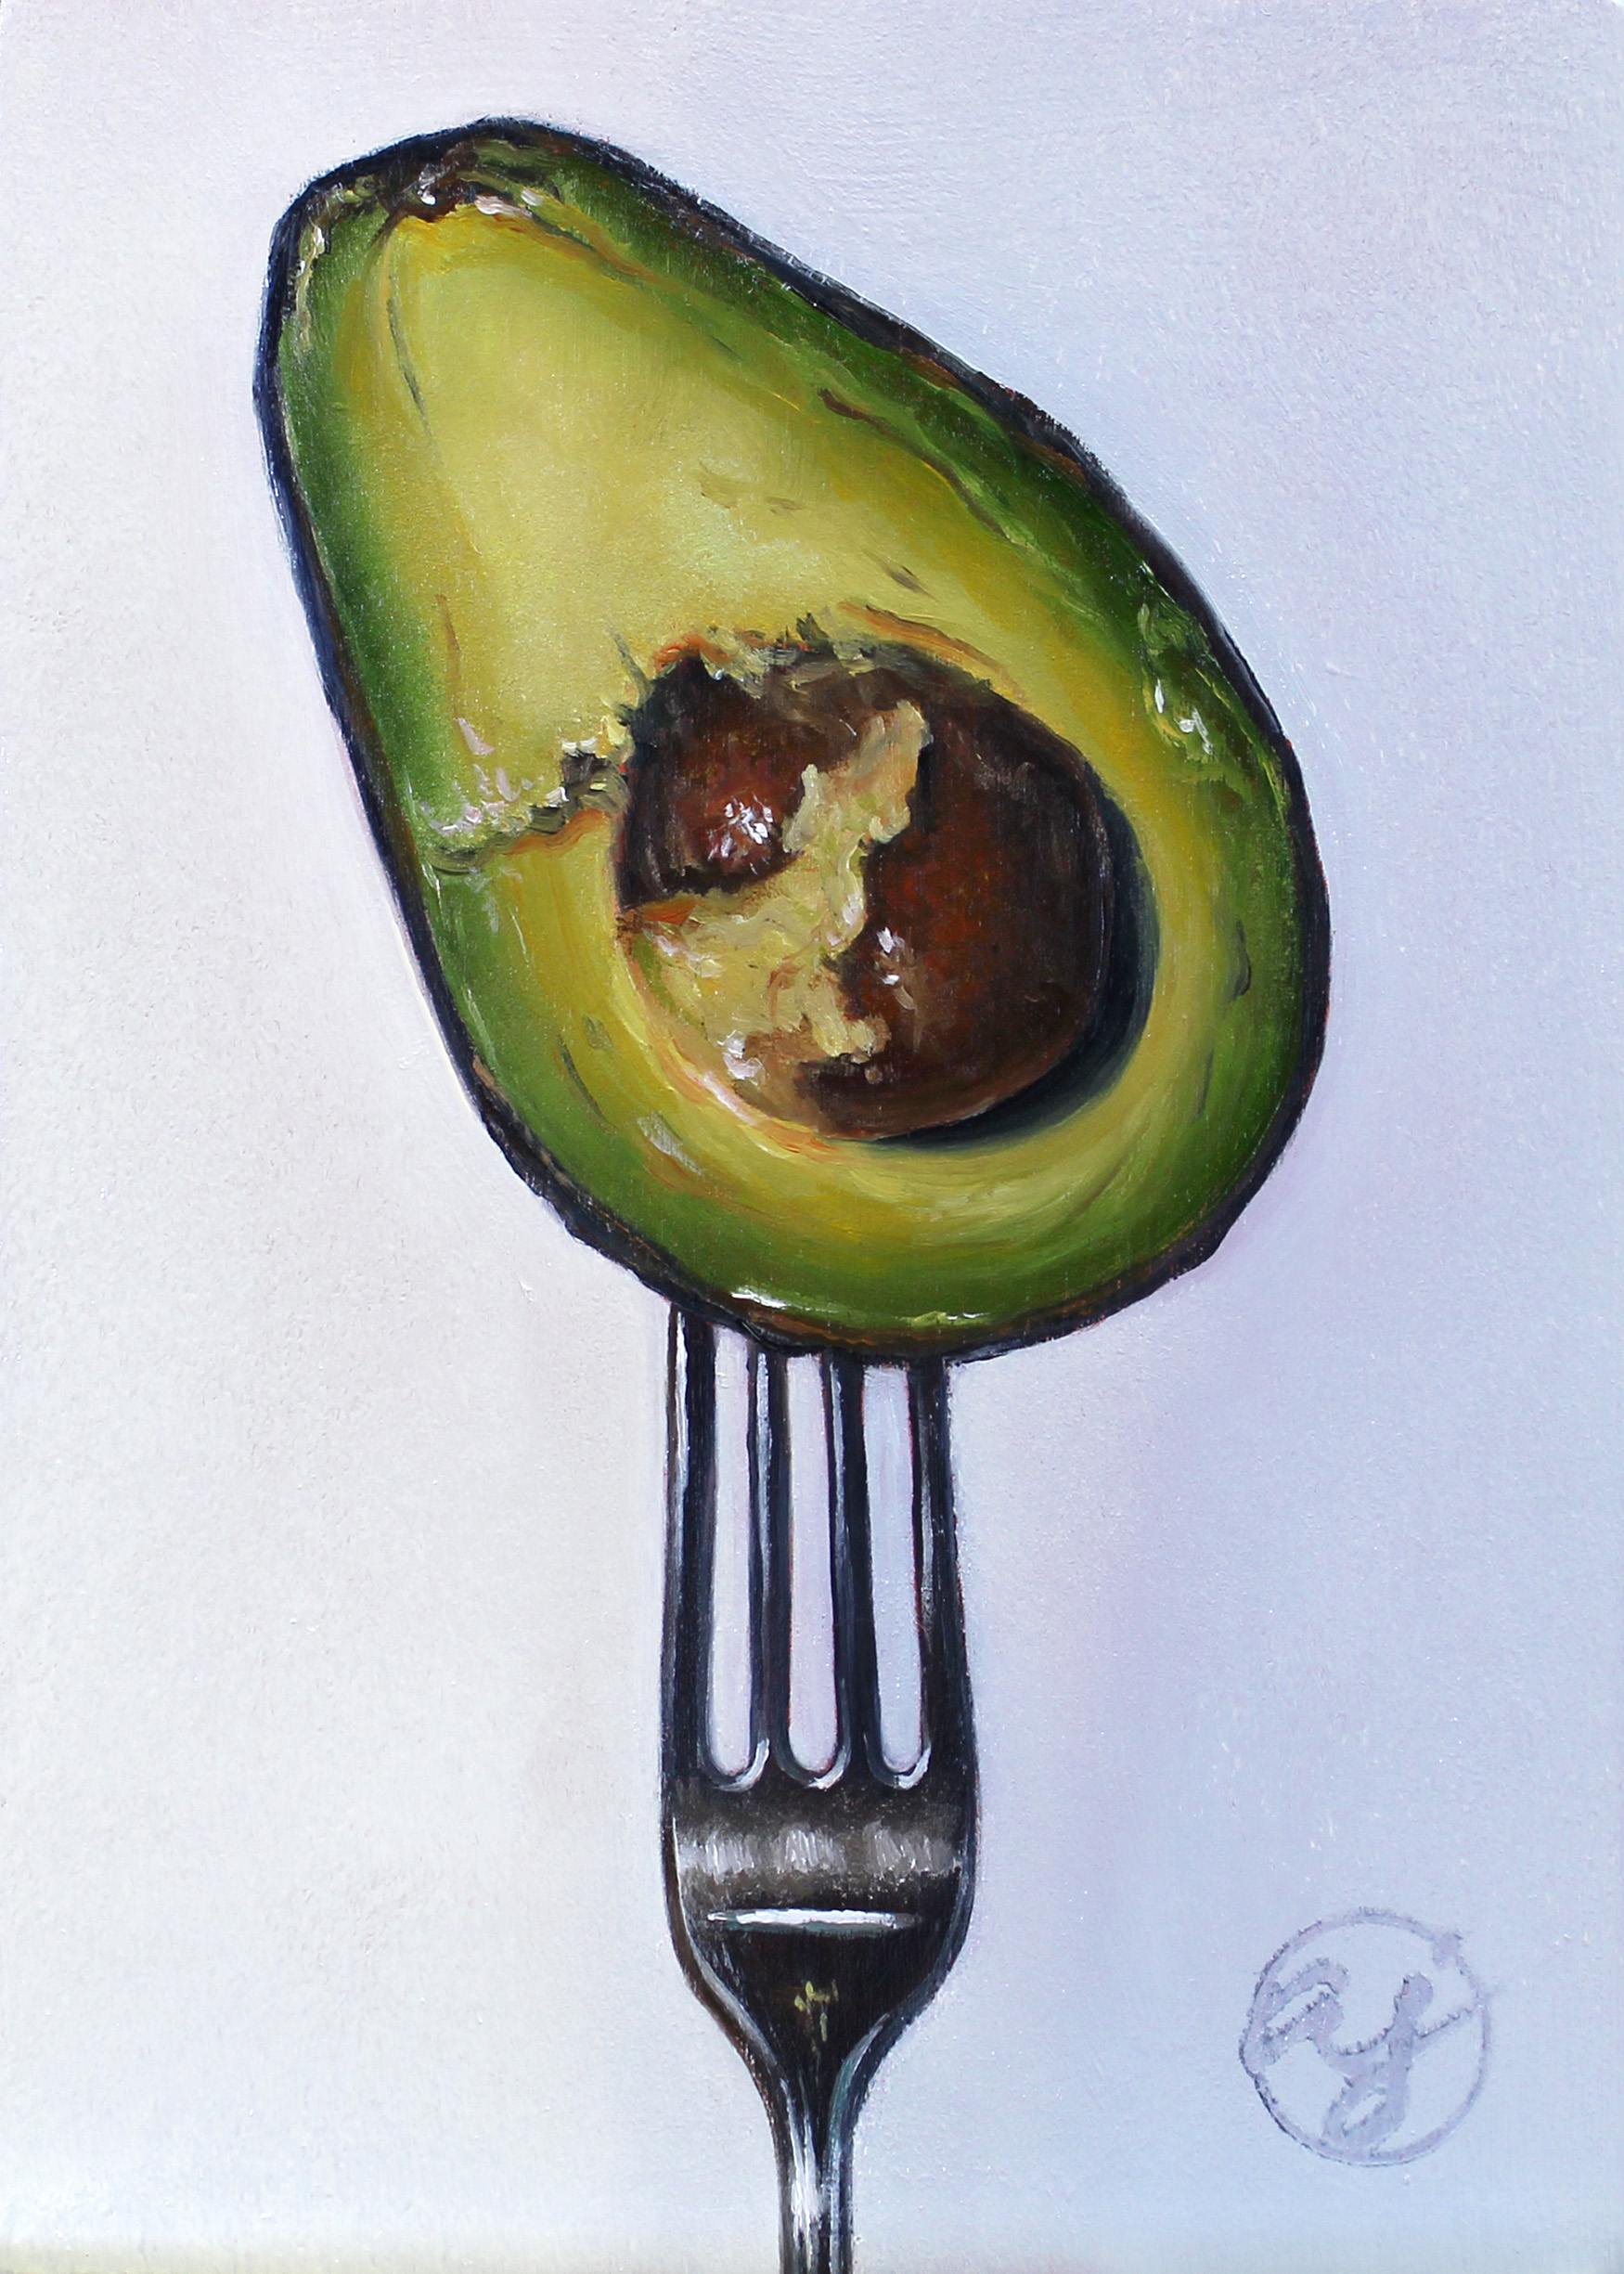 "Put a Fork in it: Avocado I" 5x7 Original Oil Painting by Abra Johnson